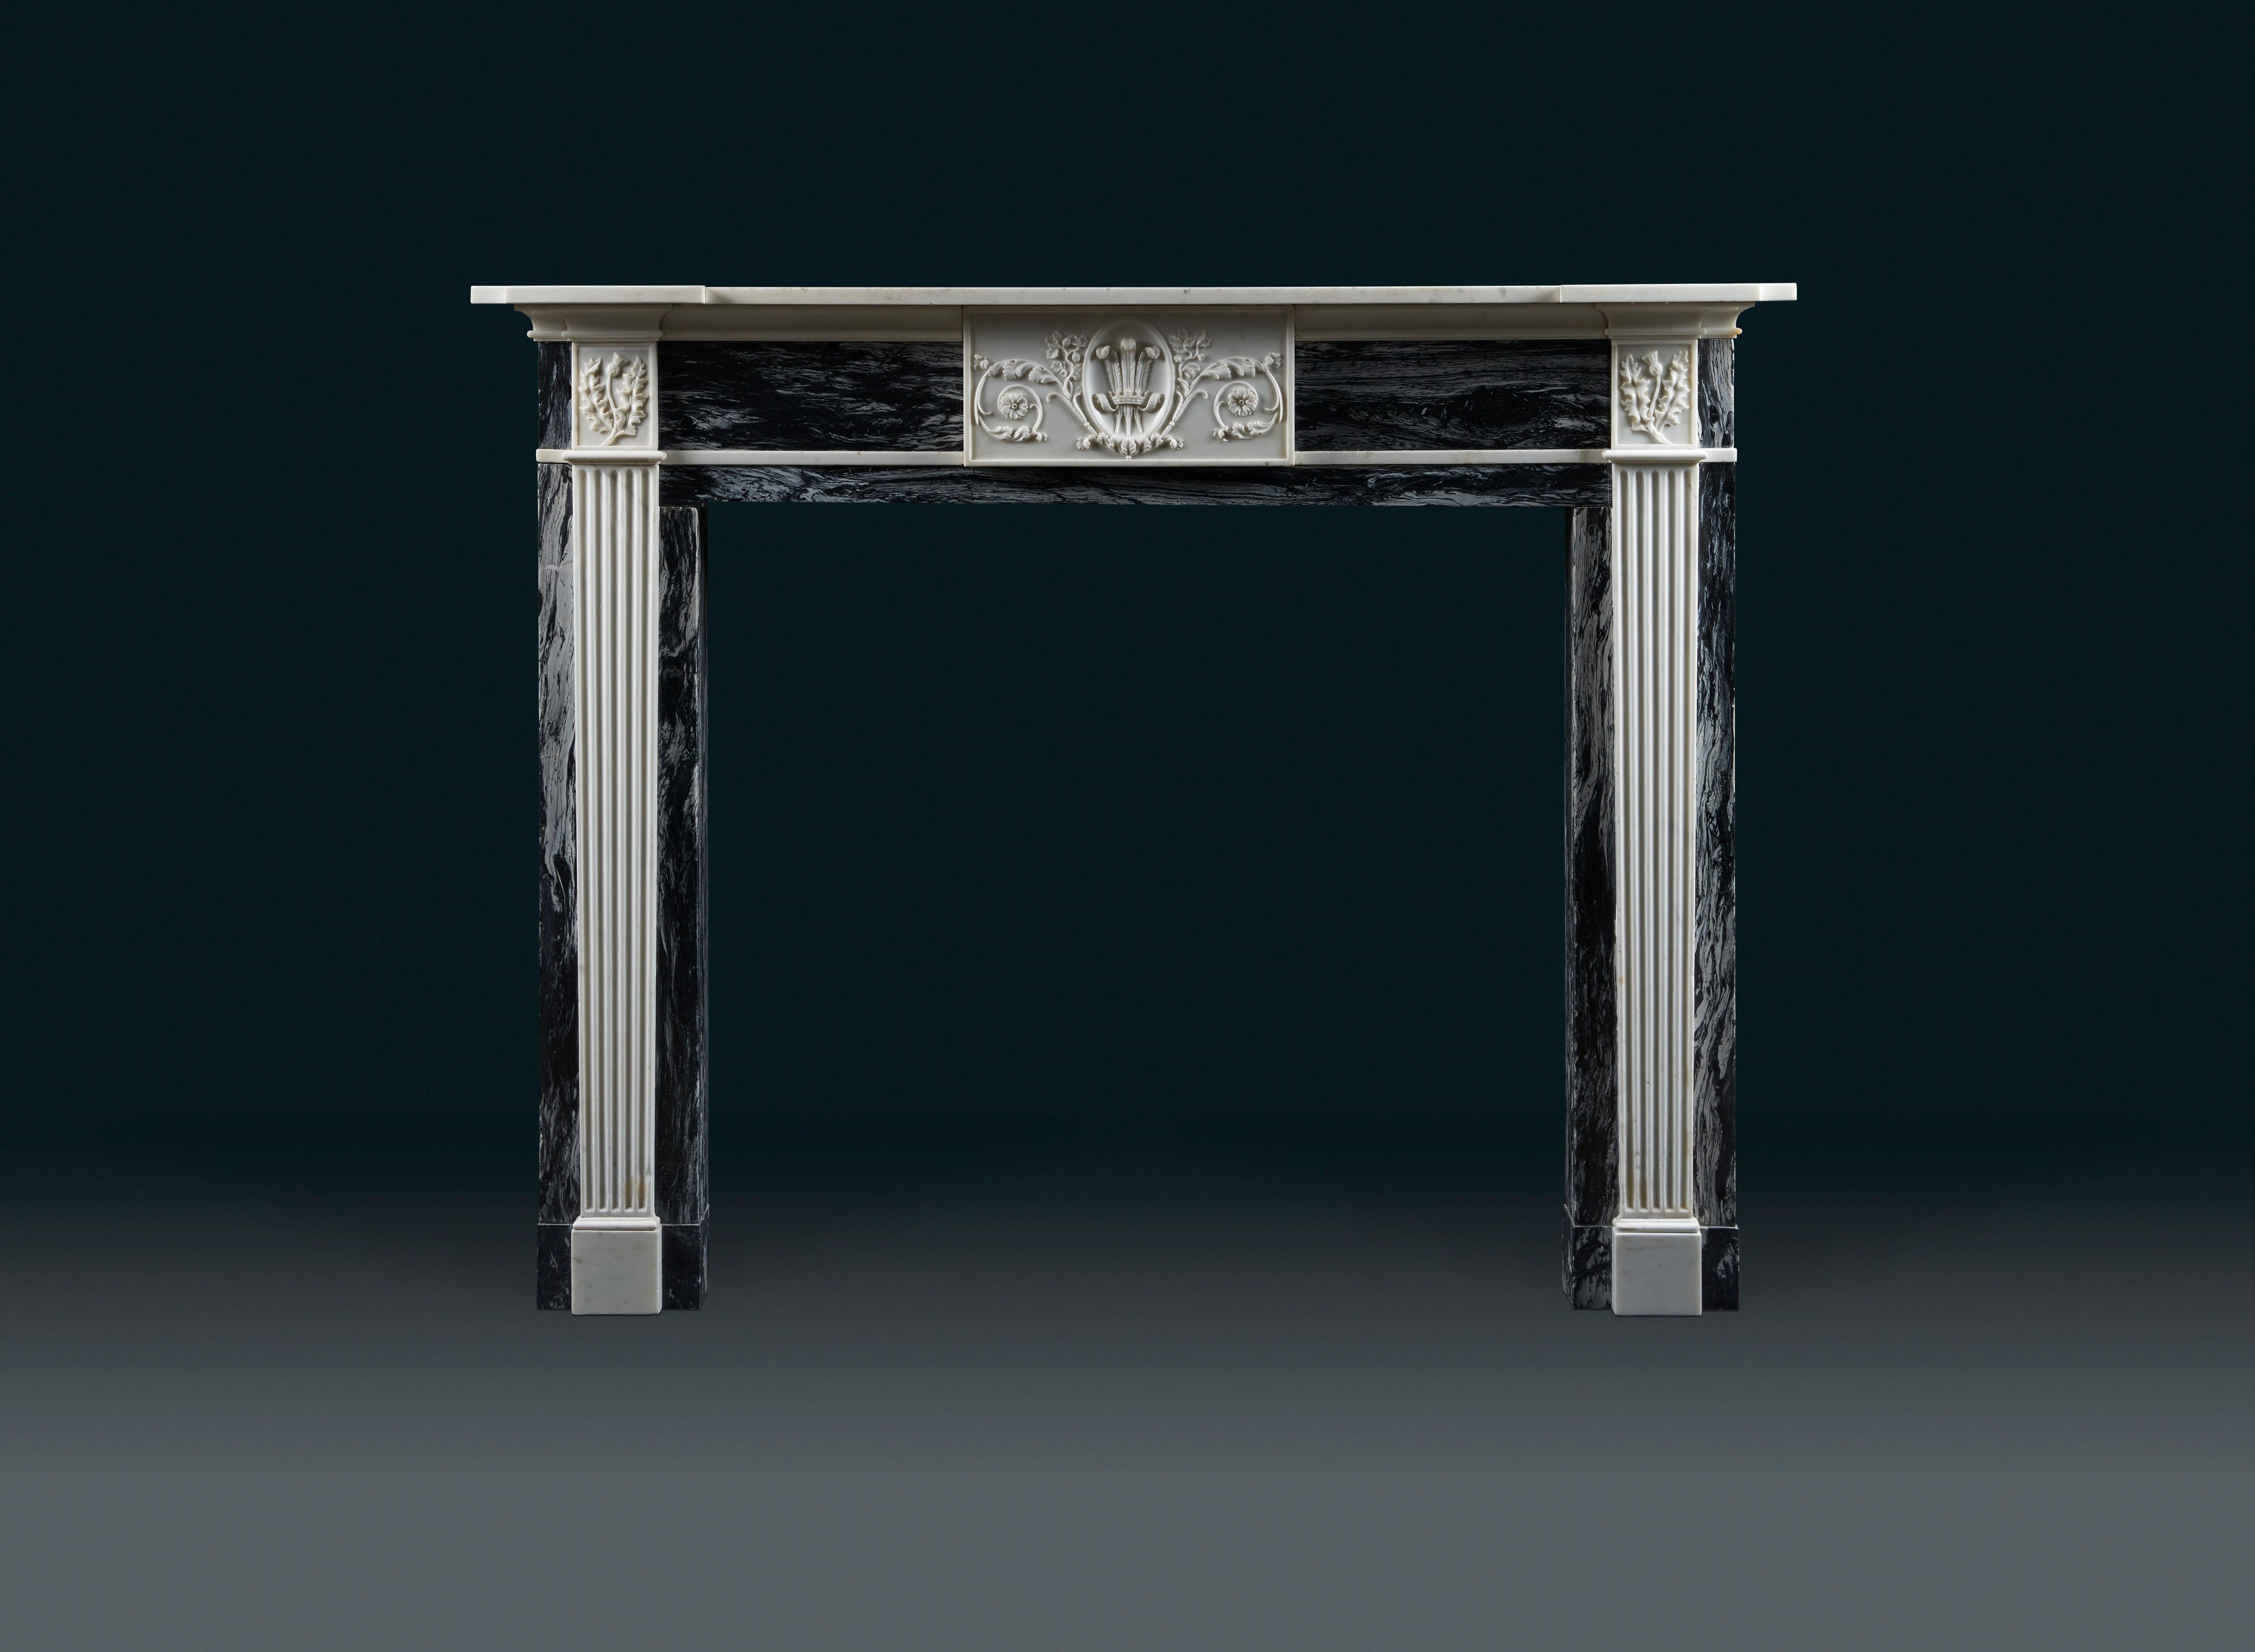 An attractive late 18th century, Scottish chimneypiece of statuary and variegated grey and black flecked marbles, circa 1795. Originally from Thriepley House, Scotland
With simple breakfront shelf above the frieze which is centred with a finely